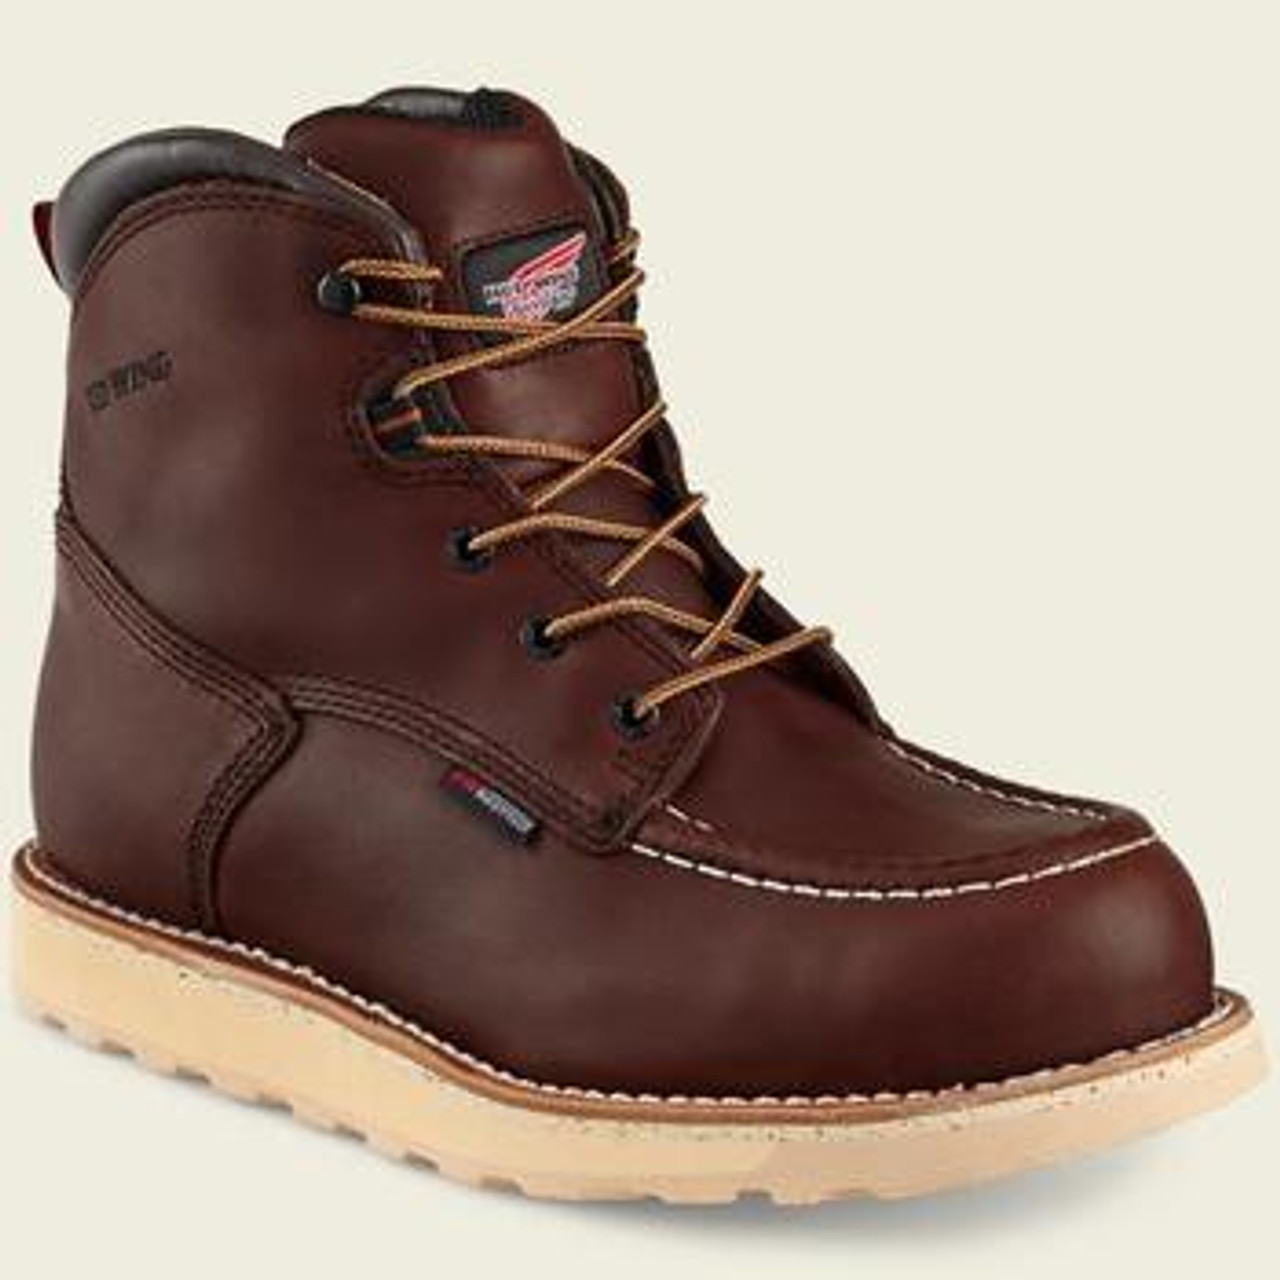 red wing wedge sole boots